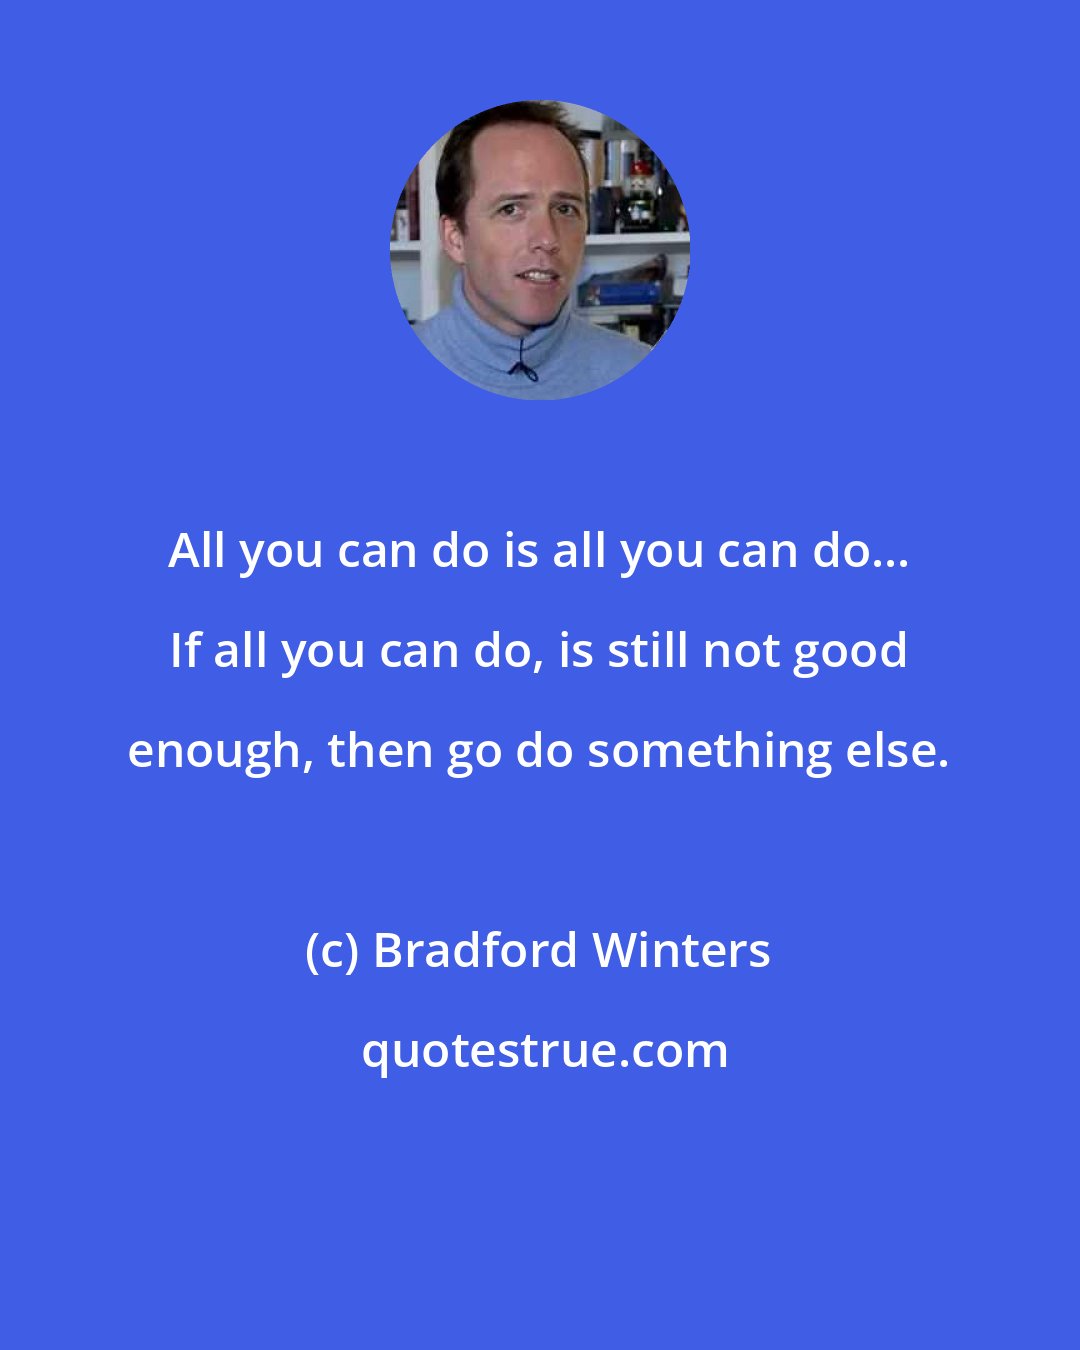 Bradford Winters: All you can do is all you can do... If all you can do, is still not good enough, then go do something else.